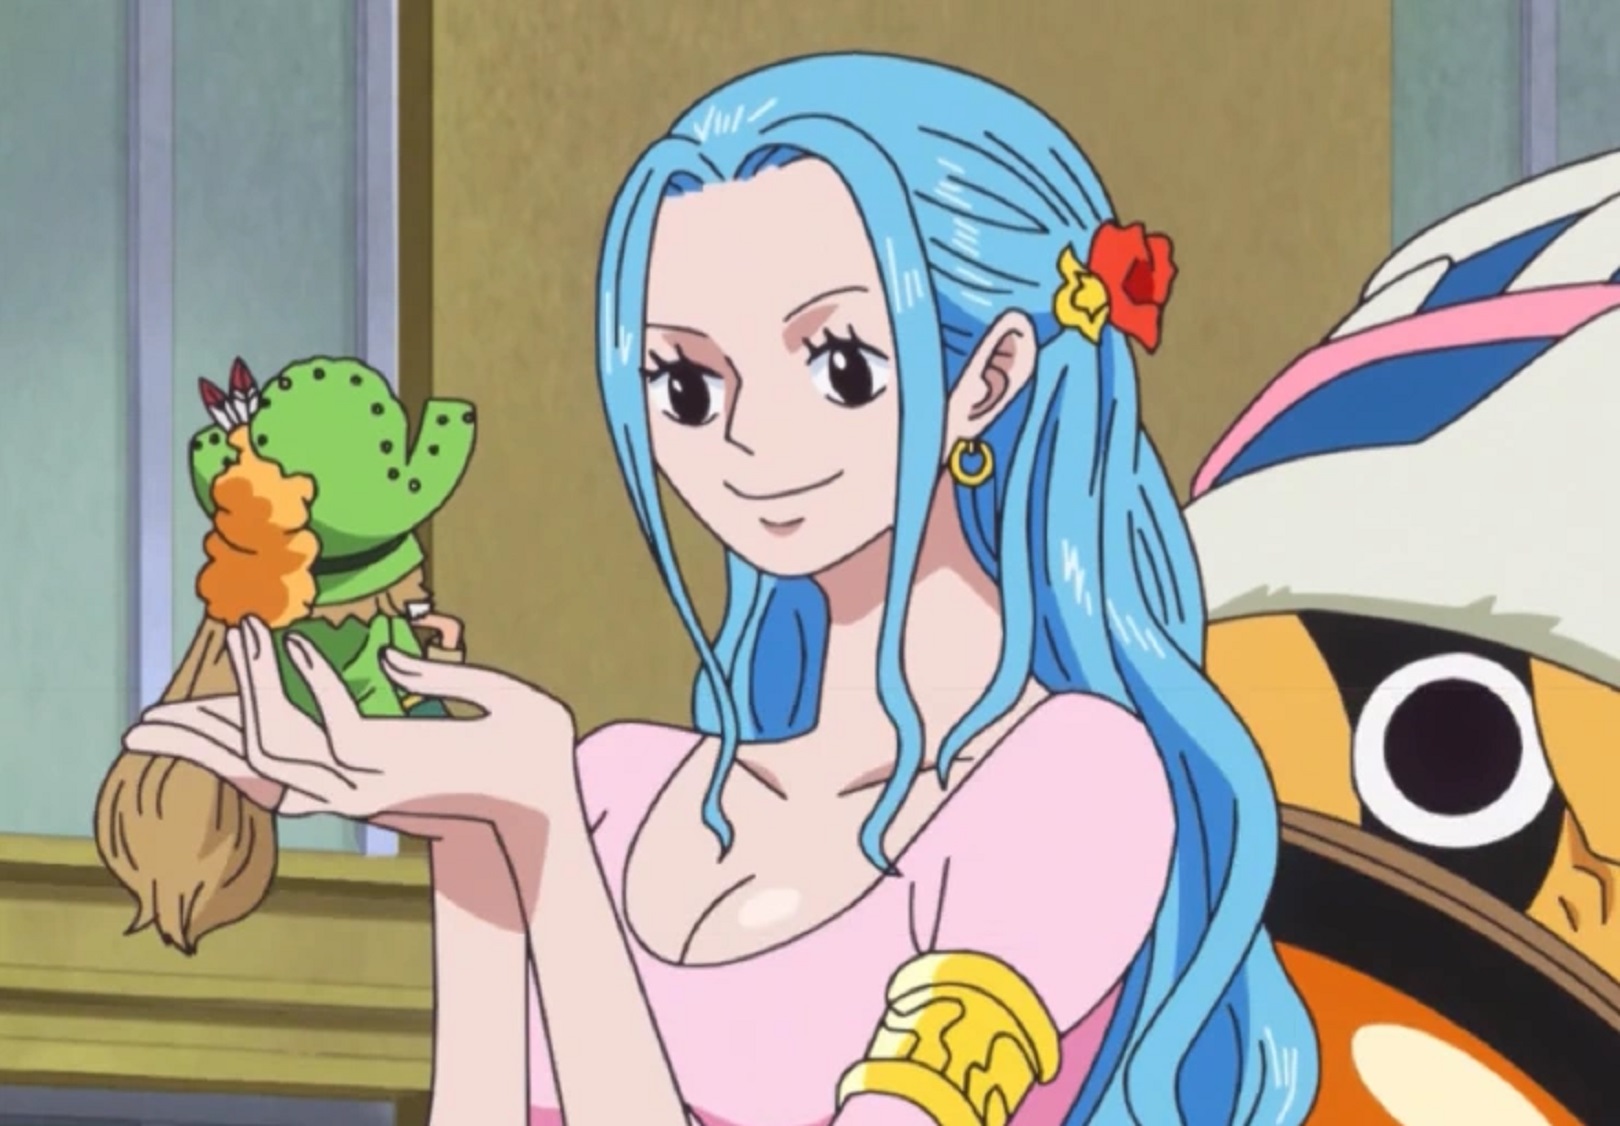 Profile of One Piece's Nefertari Vivi, the Princess of Alabasta Whose Life is in Danger in Chapter 1086